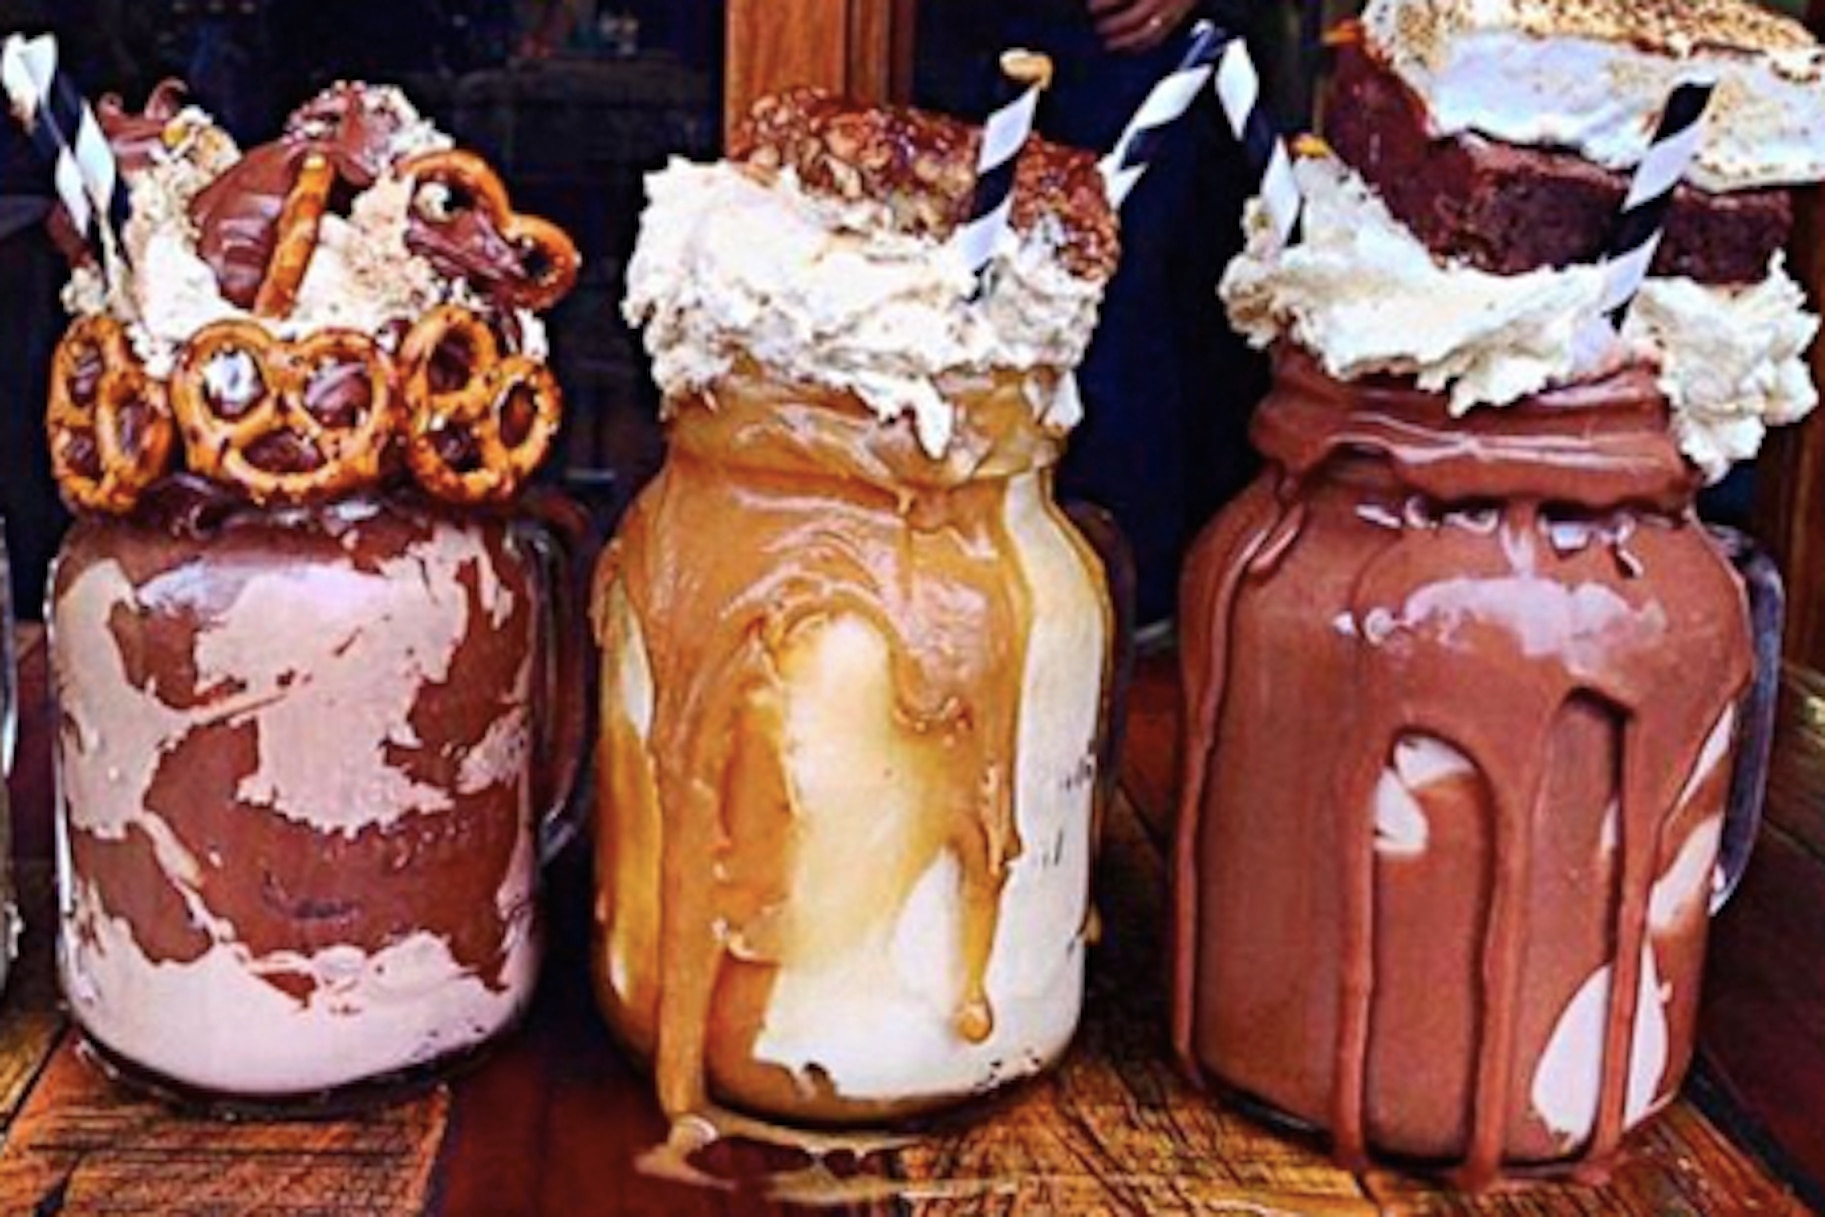 The Most Outrageous Food Porn On Instagram - Very Real